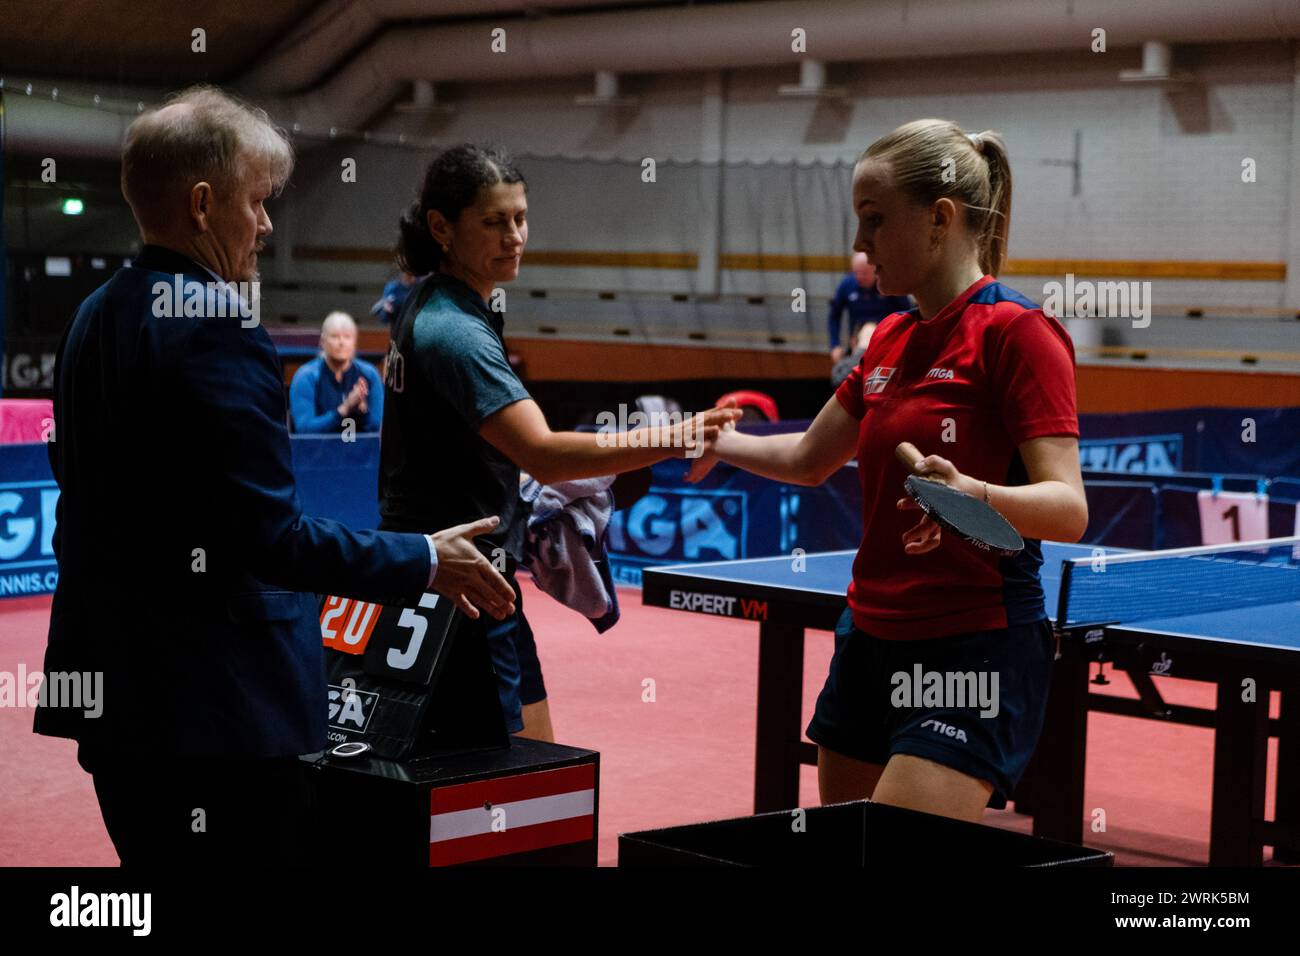 Hand shakes at the end of the match as Donner wins. Marina Donner of Finland (blue) plays Rikke Skåttet of Norway (red). Action from the women's international matches art the Finland v Norway European Table Tennis Championships Qualification Group (for the 2023 European tournament) in Helsinki, 17 October 2022. Stock Photo